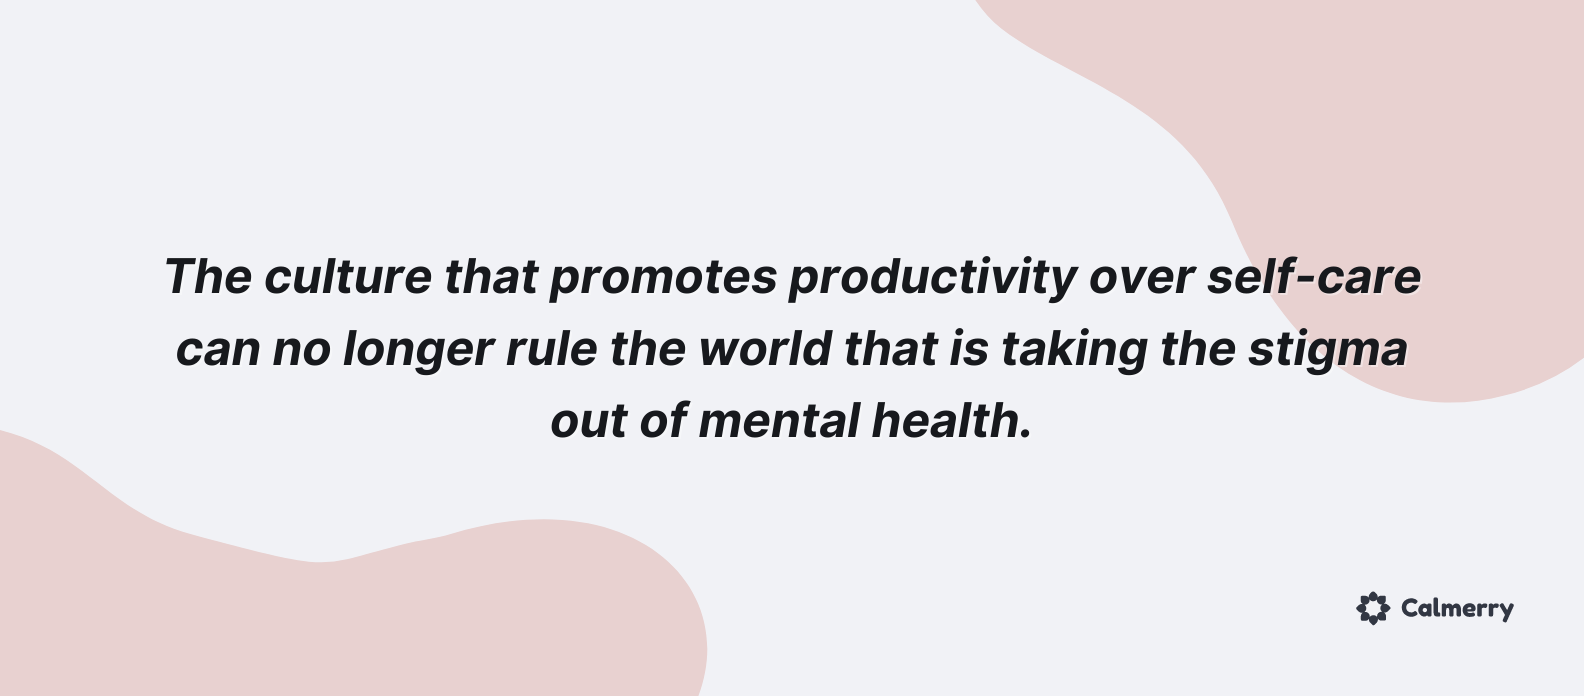 The culture that promotes productivity over self-care